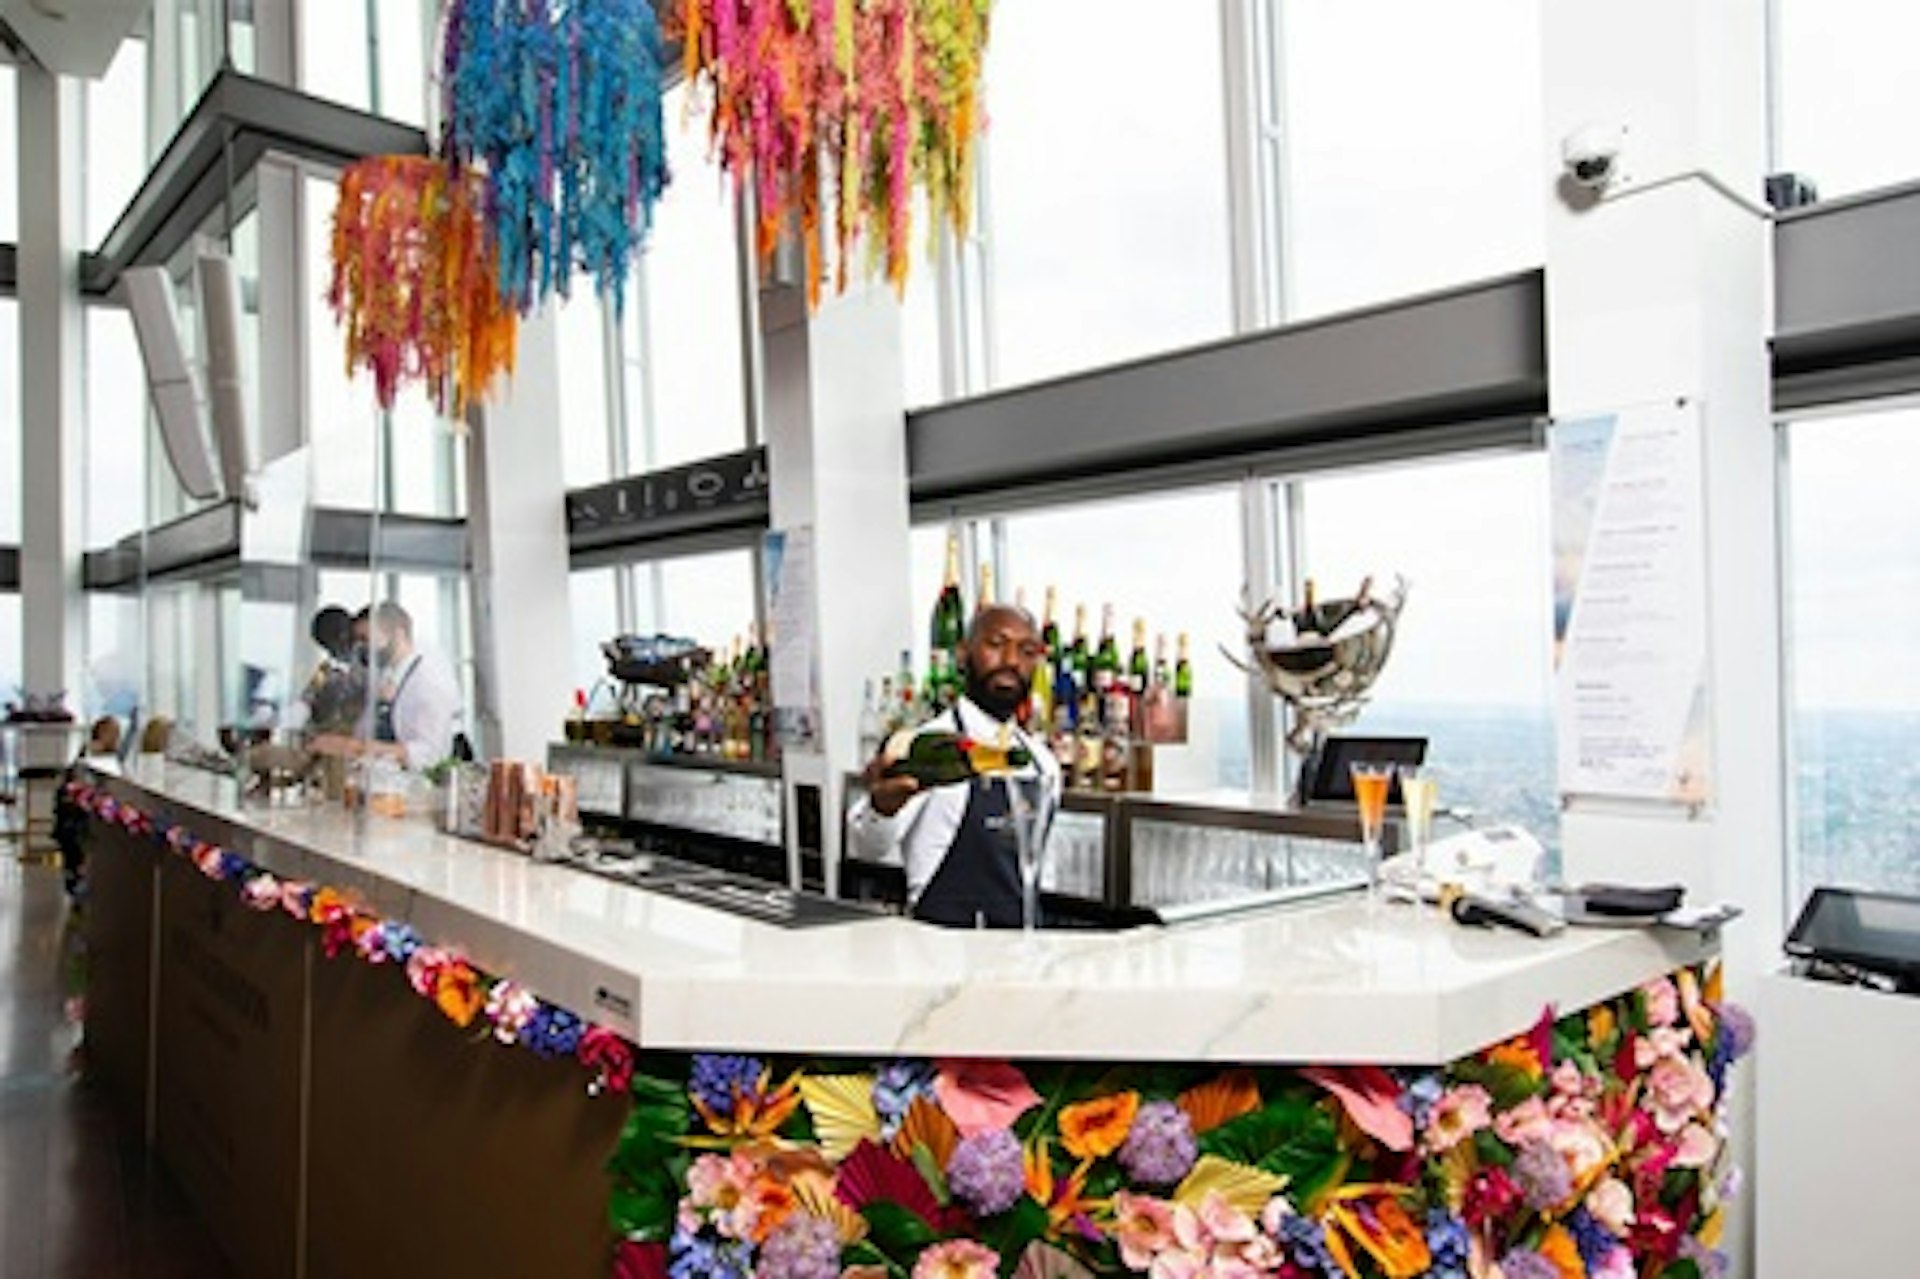 Deluxe Visit to The View from The Shard with Champagne, Photos and Guidebook for Two